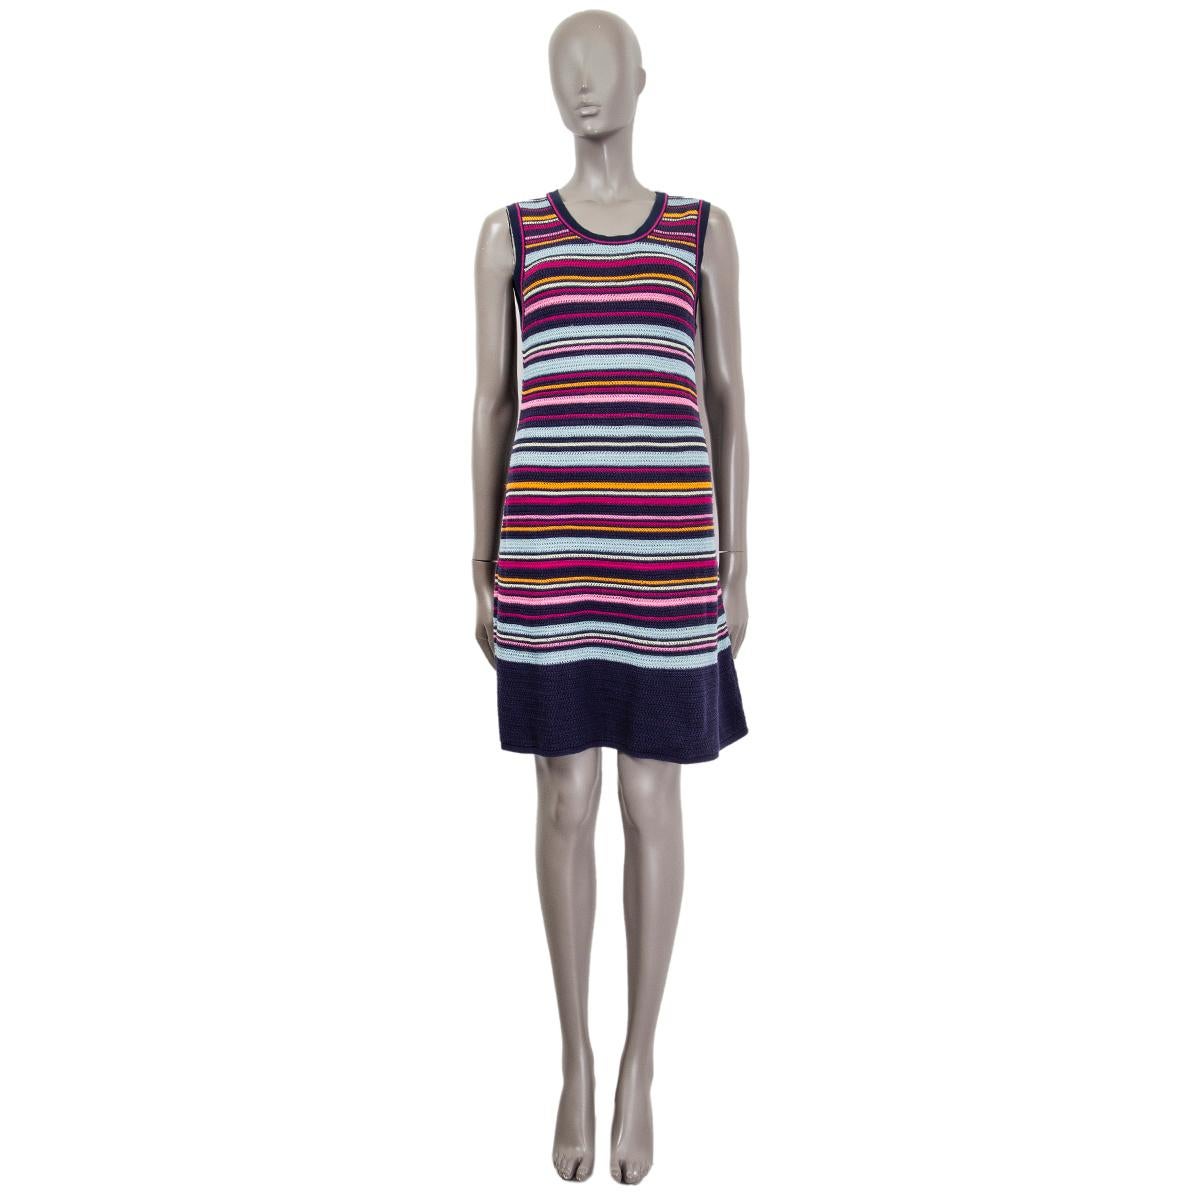 100% authentic Chanel striped sleevless dress in navy, pink, baby blue, baby pink and mustard cotton (91%) and cashmere (9%). Key-hole detail on the back. Has been worn and is in excellent condition. 

2011 Spring/Summer

Measurements
Tag